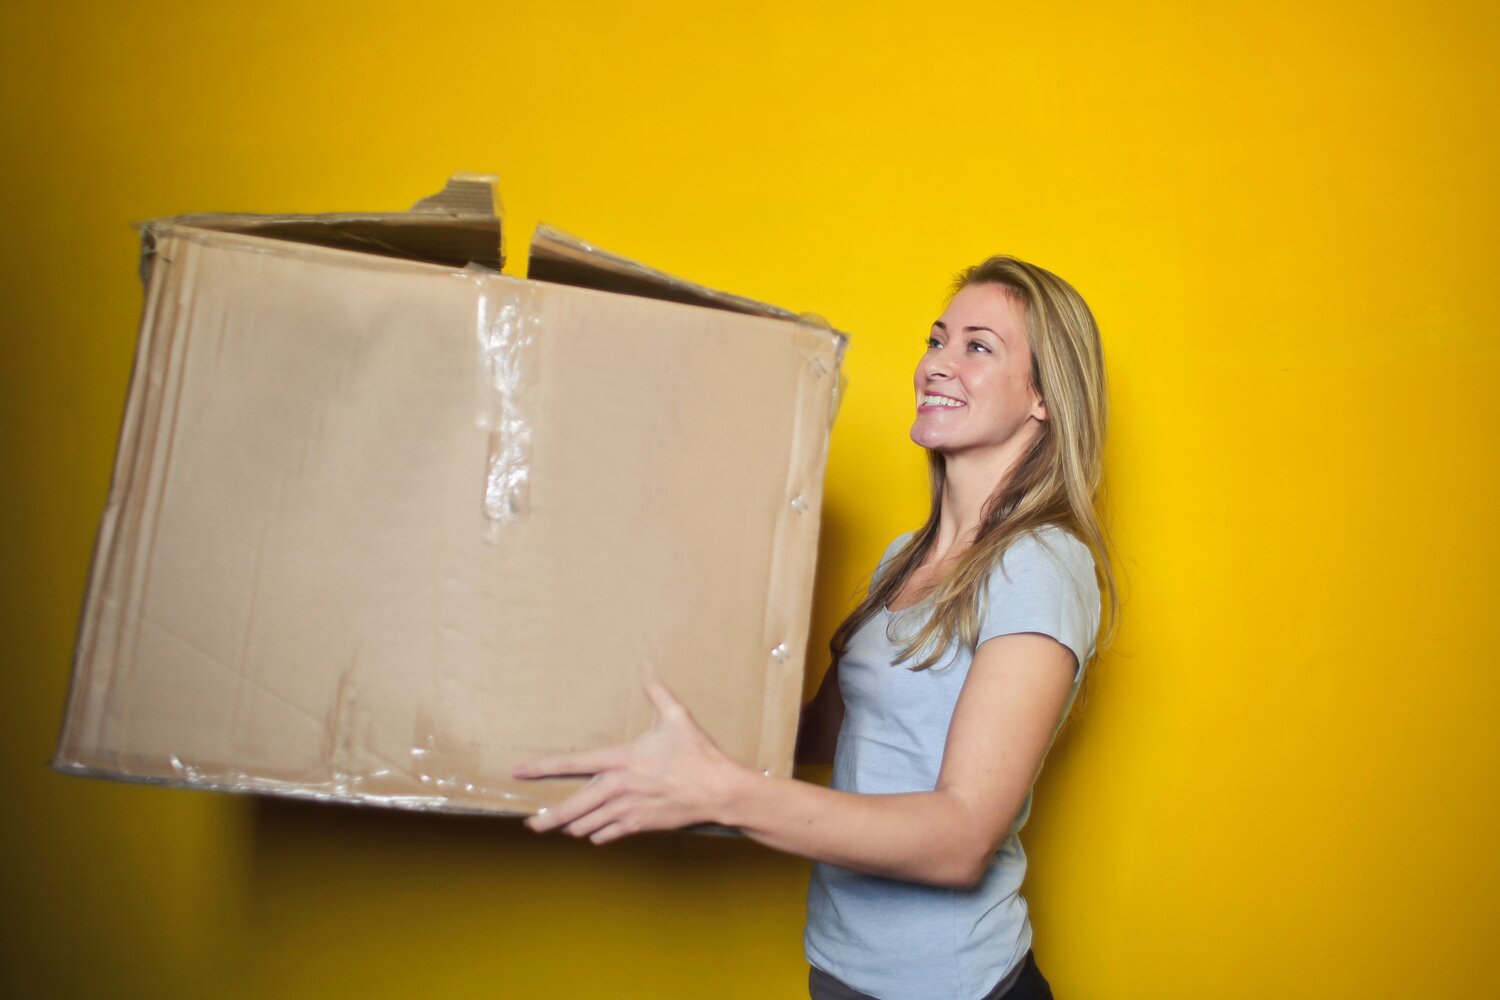 SGR 076: Are You Hiding Amazon Boxes from Your Partner?